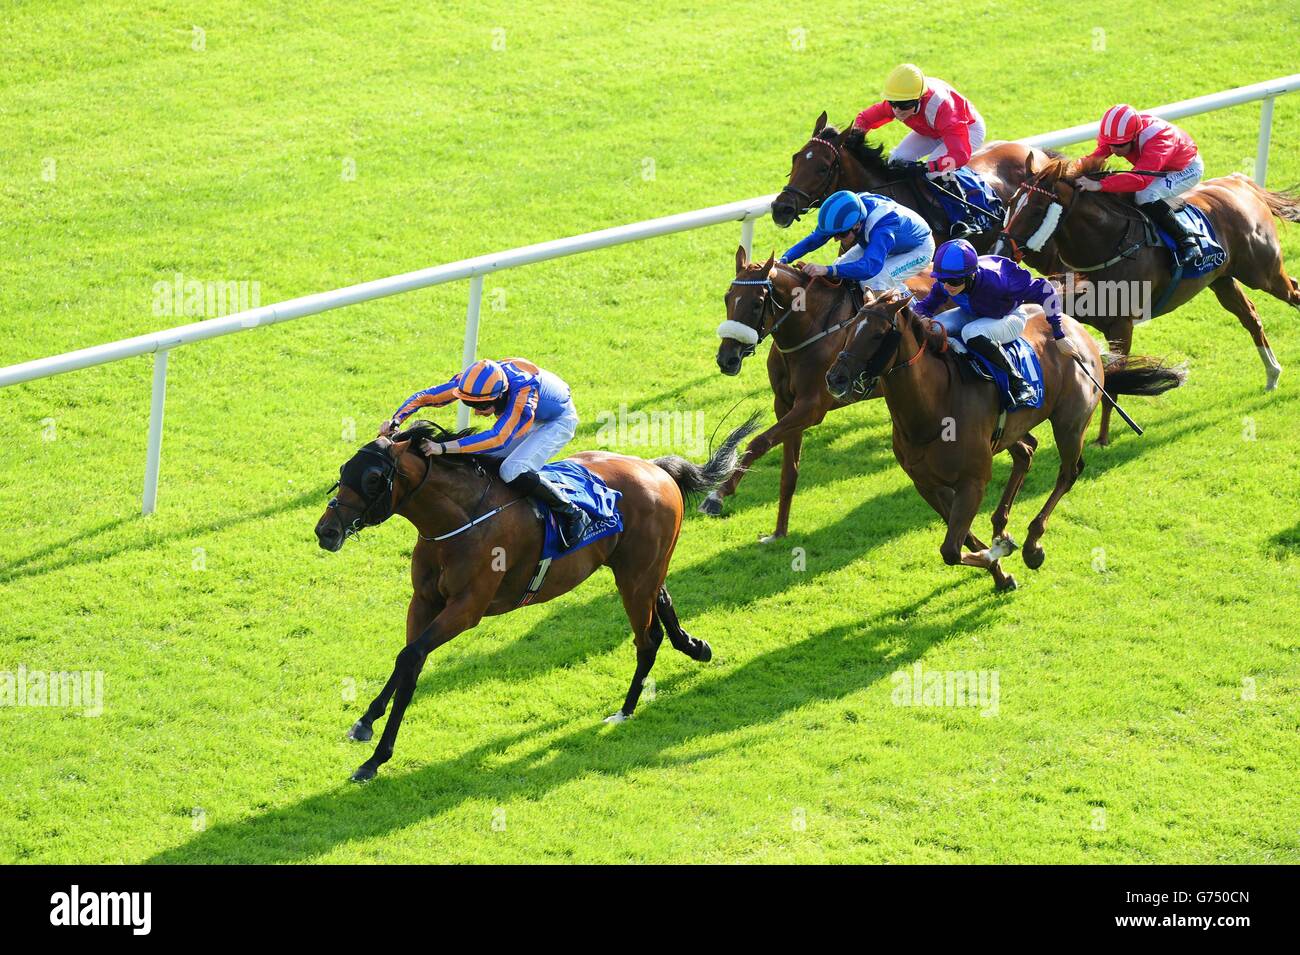 Table Rock and Joseph O'Brien on their way to victory in the Done Deal Handicap during the Dubai Duty Free Irish Derby at Curragh Racecourse, Co Kildare, Ireland. Stock Photo